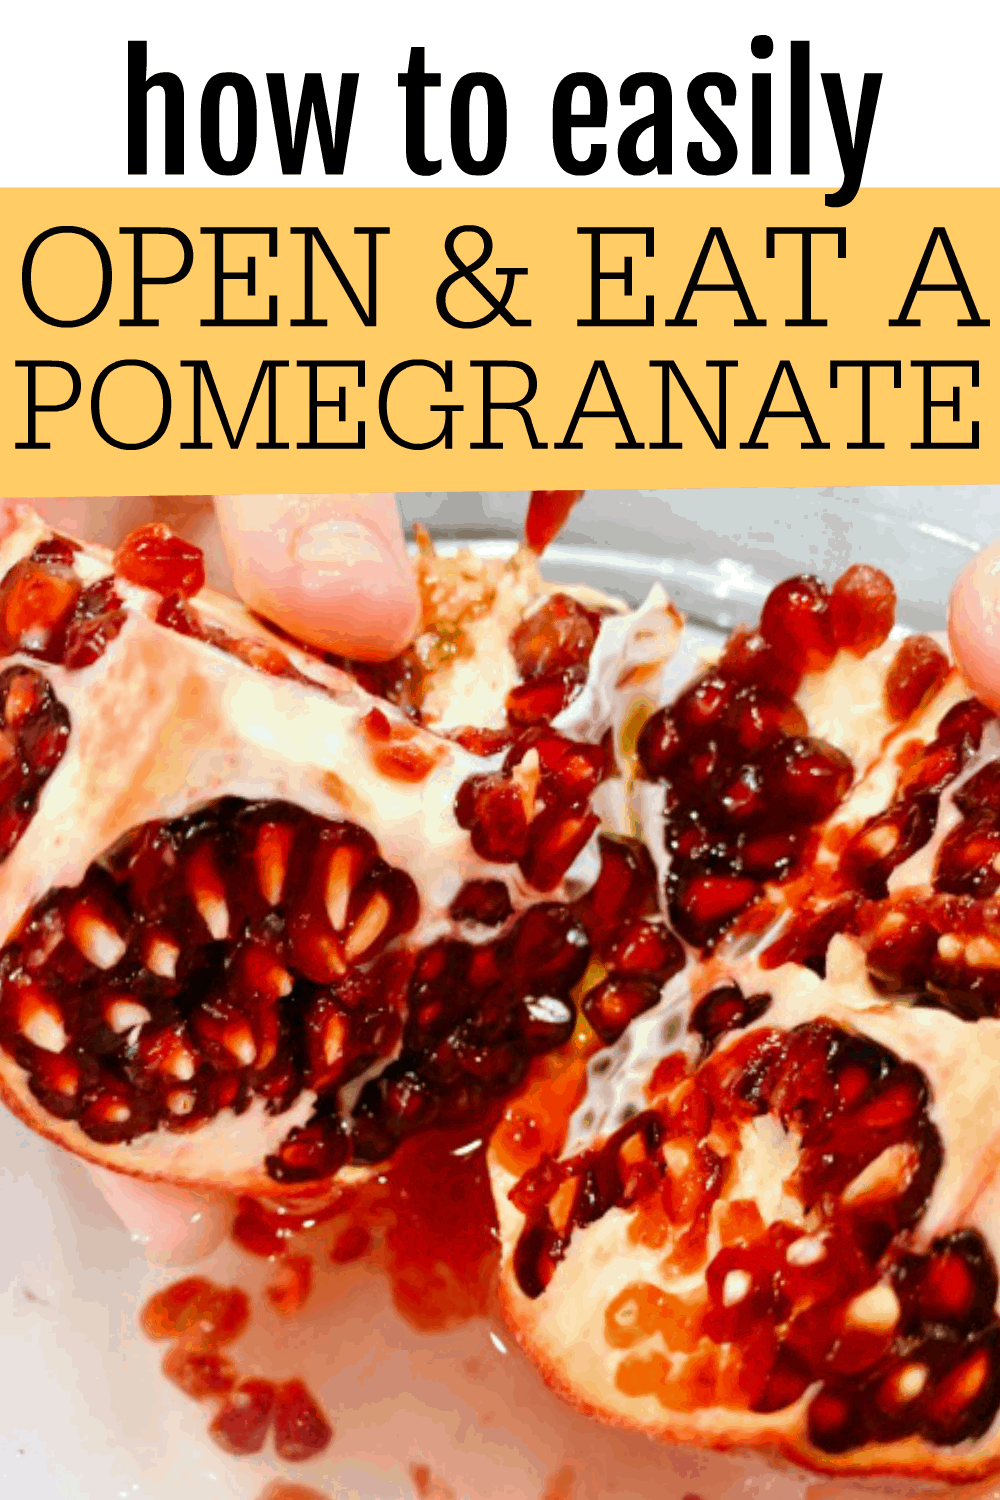 HOW TO OPEN A POMEGRANATE